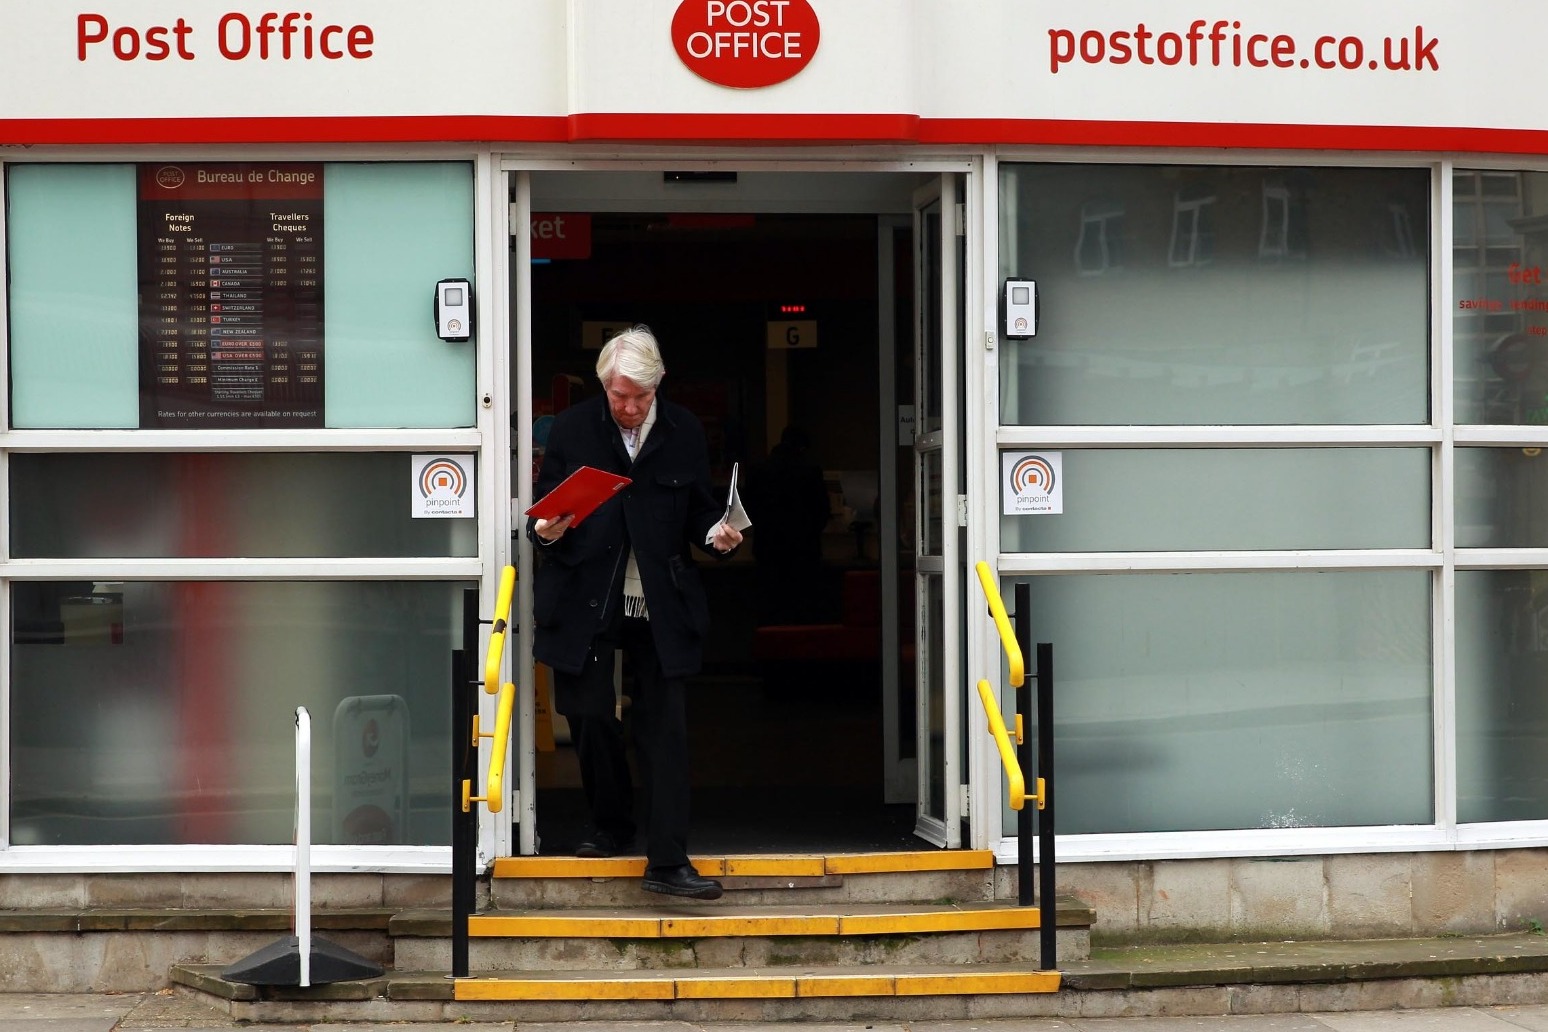 Record amount of cash handled by Post Office in August before September dip 